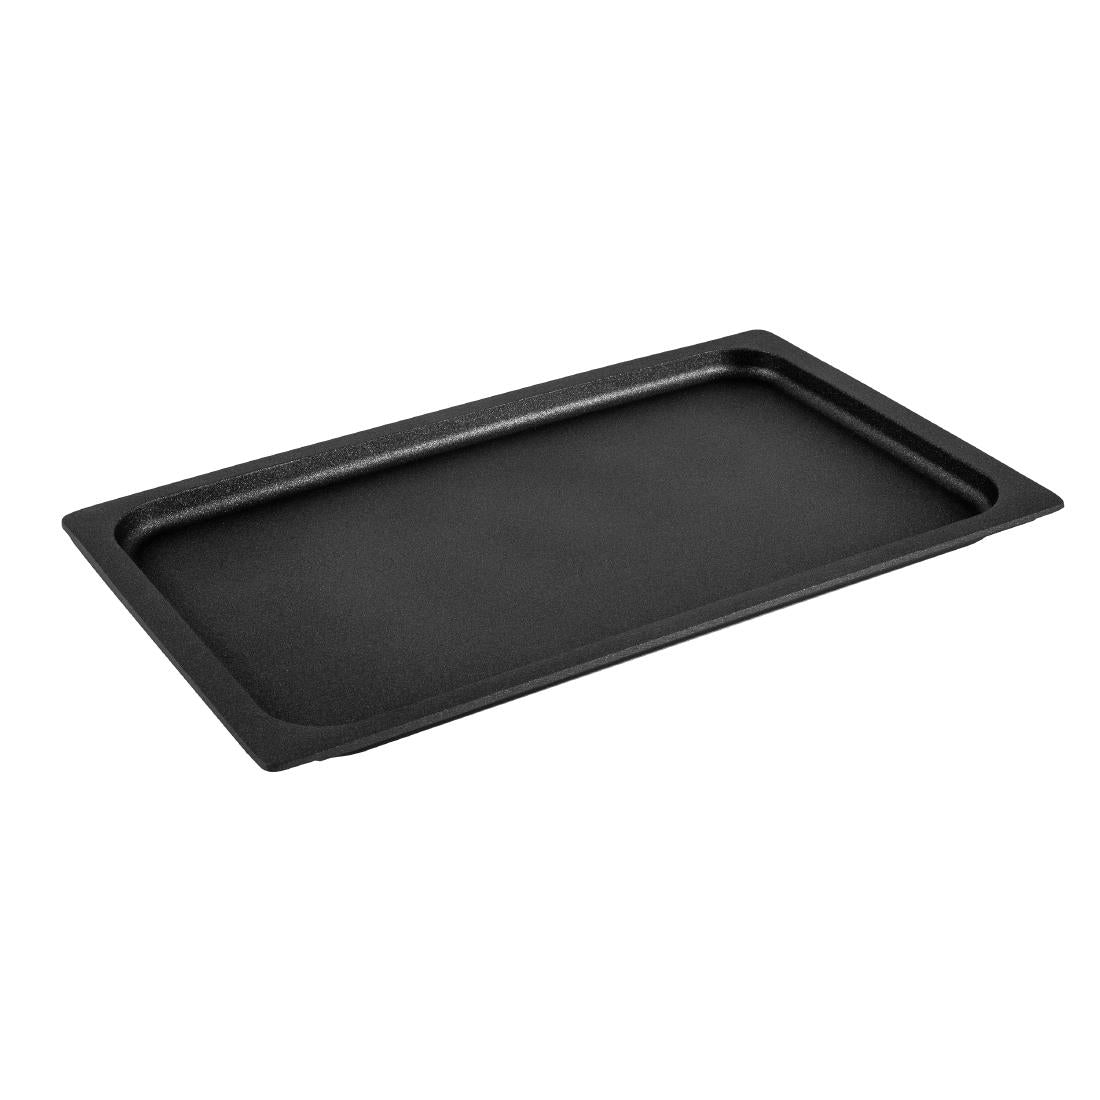 AT312 Josper Charcoal Oven 1/1 Gastronorm Tray 20mm